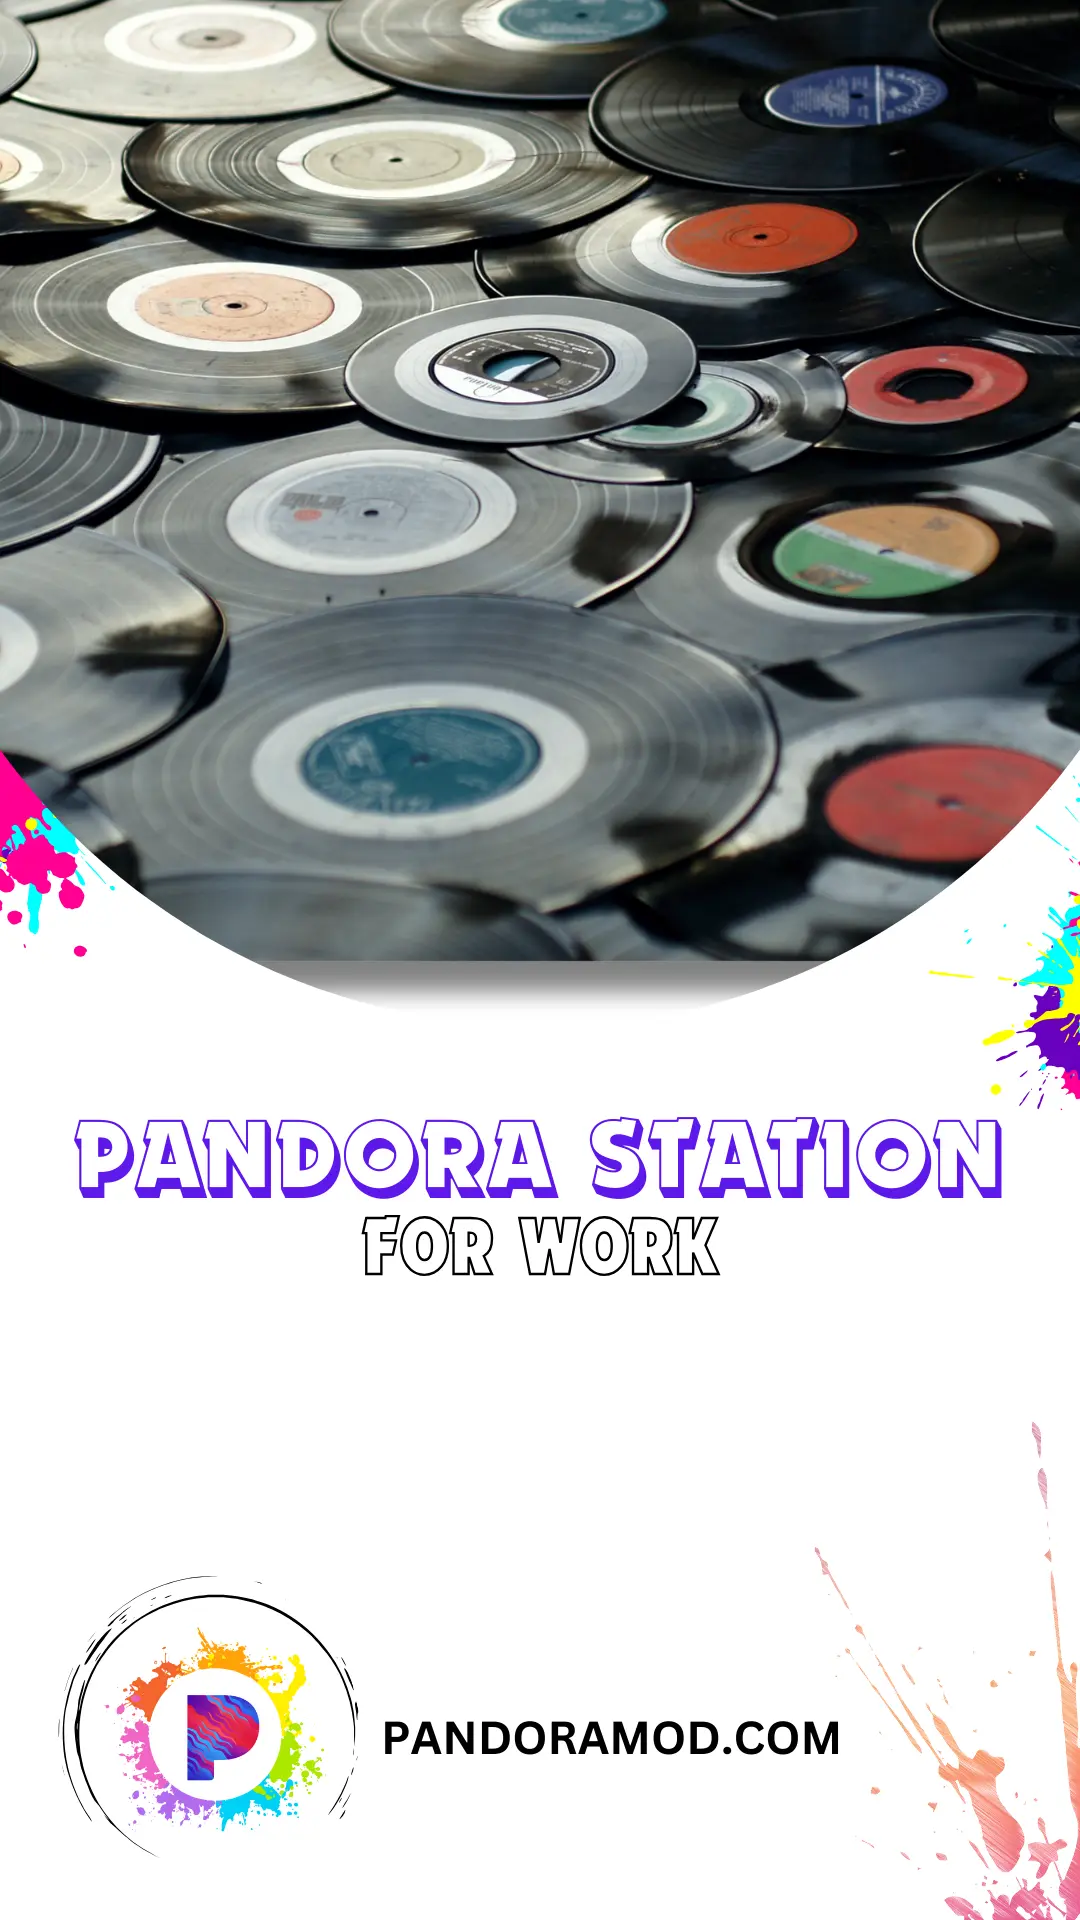 What is Pandora Stations For Works